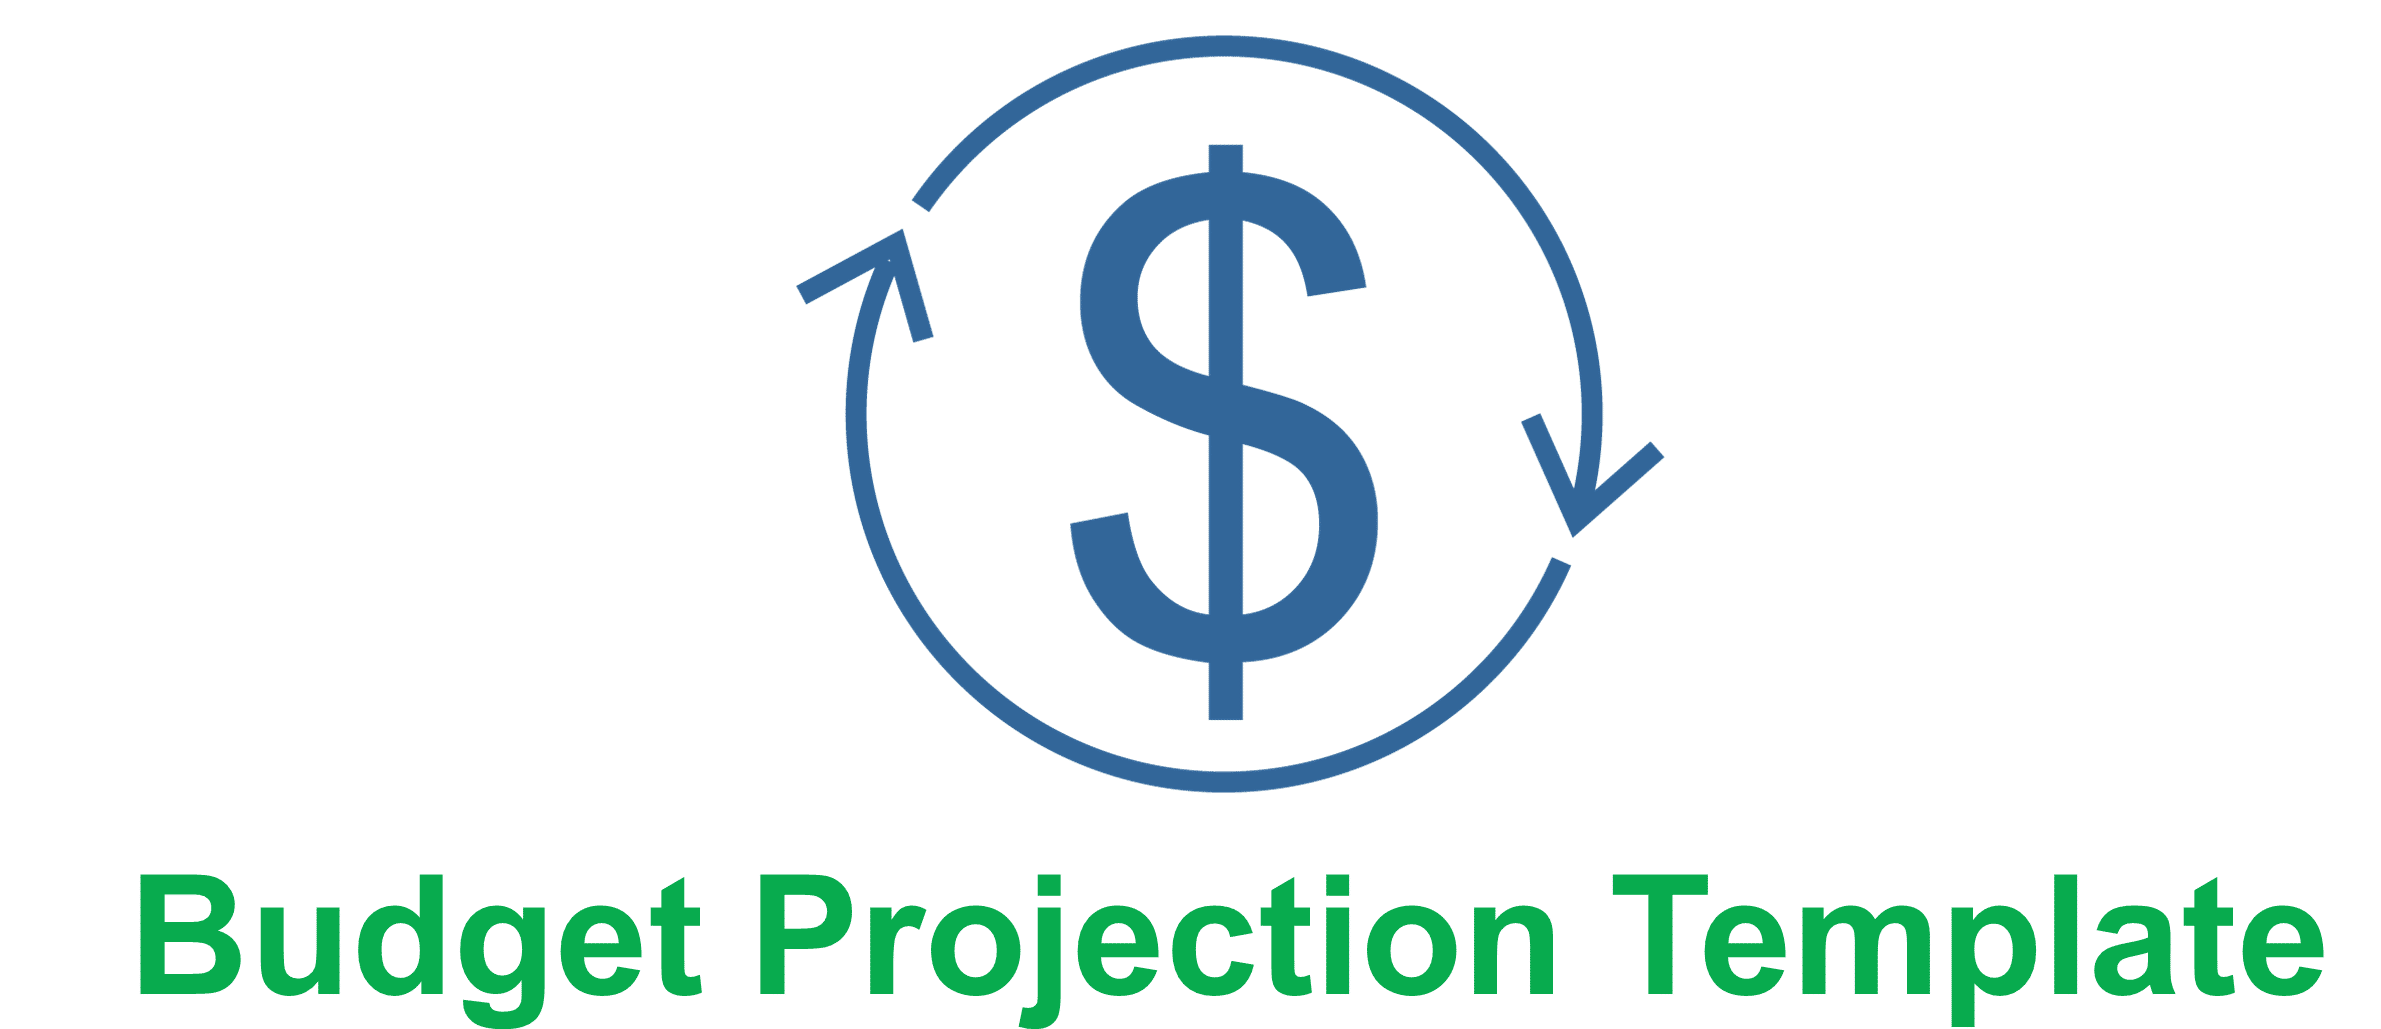 Budget Projection Template